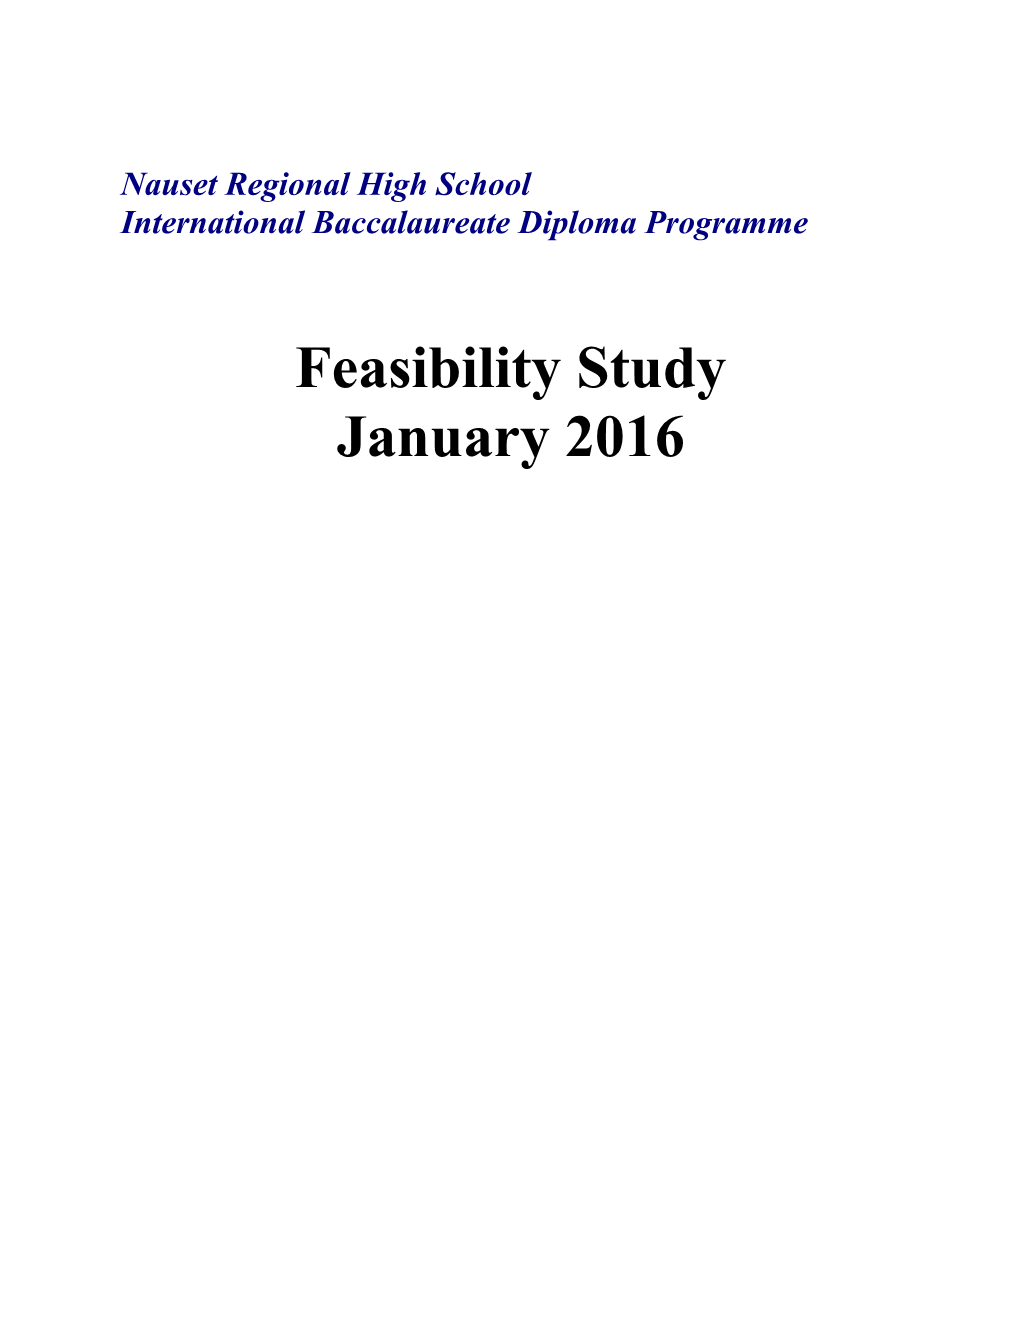 Preliminary Project Feasibility Study Template Static Text Introduction